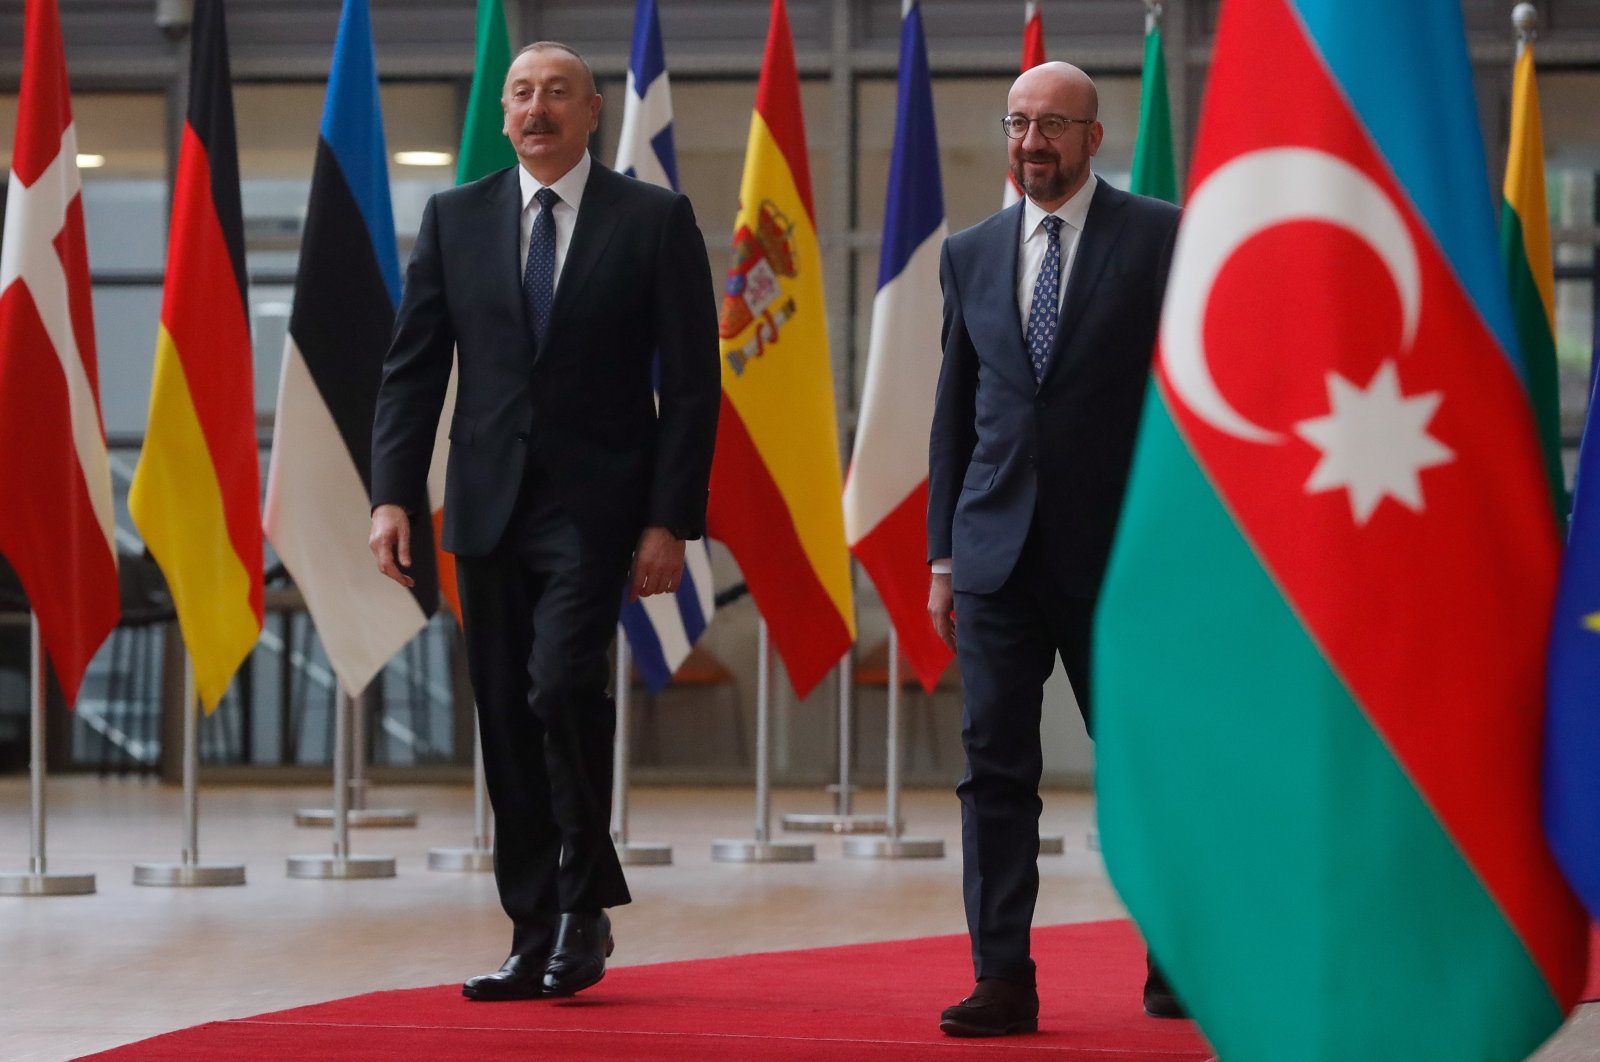 Azerbaijani President Ilham Aliyev (L) is welcomed by European Council President Charles Michel (R) ahead of a meeting at the European Council in Brussels, Belgium, April 6, 2022.  (EPA Photo)